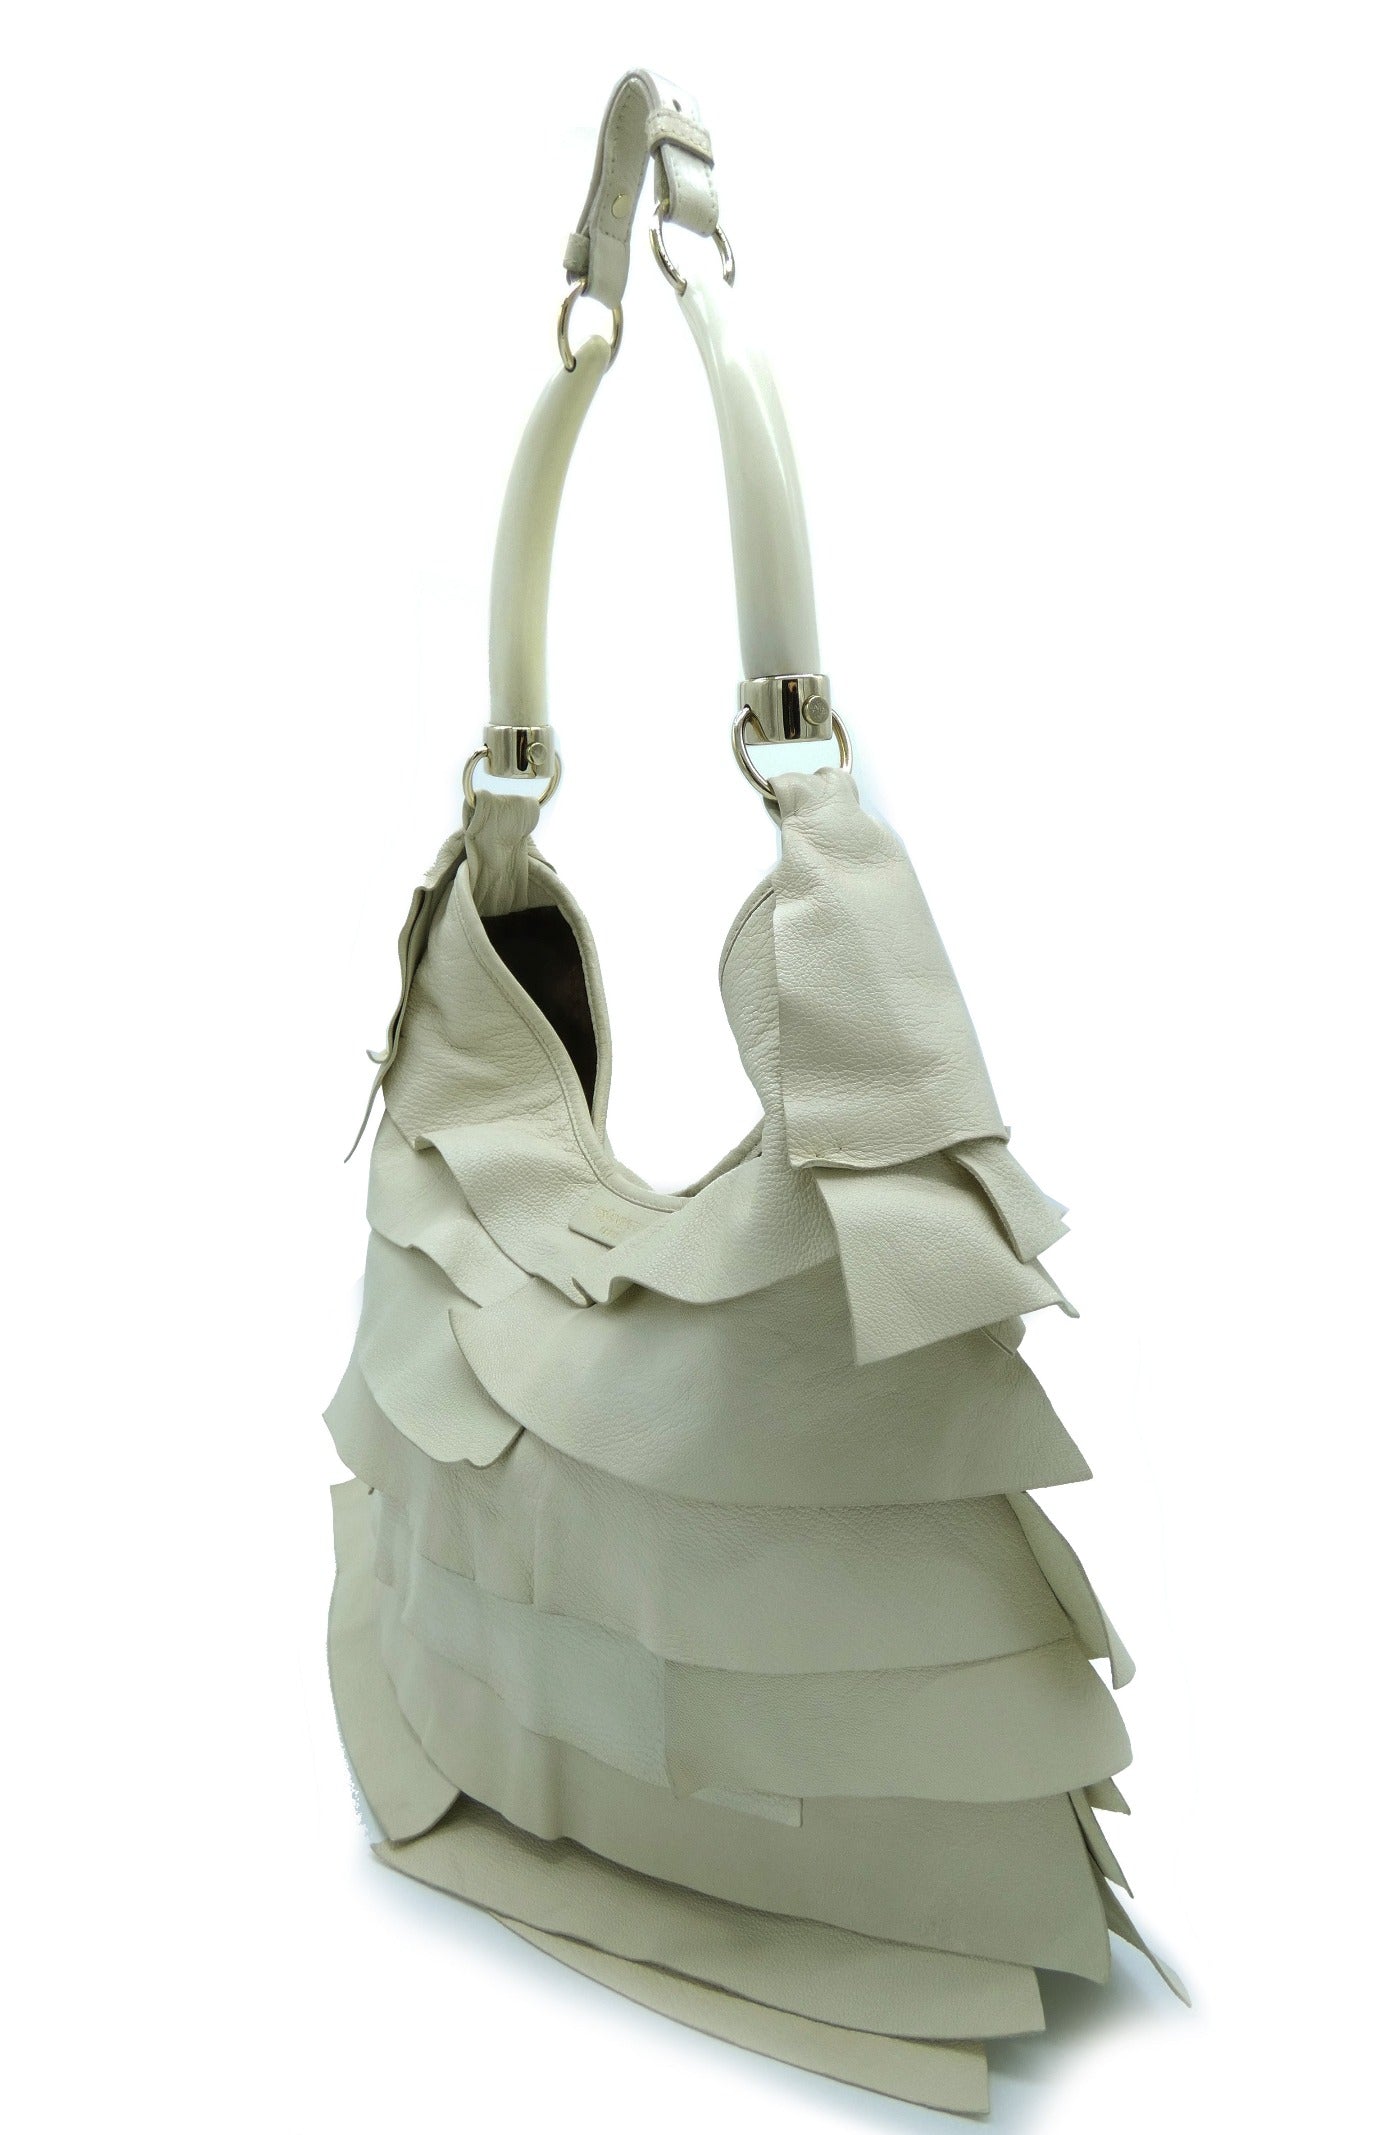 Yves Saint Laurent Mombasa Suede White Leather Tote Bag